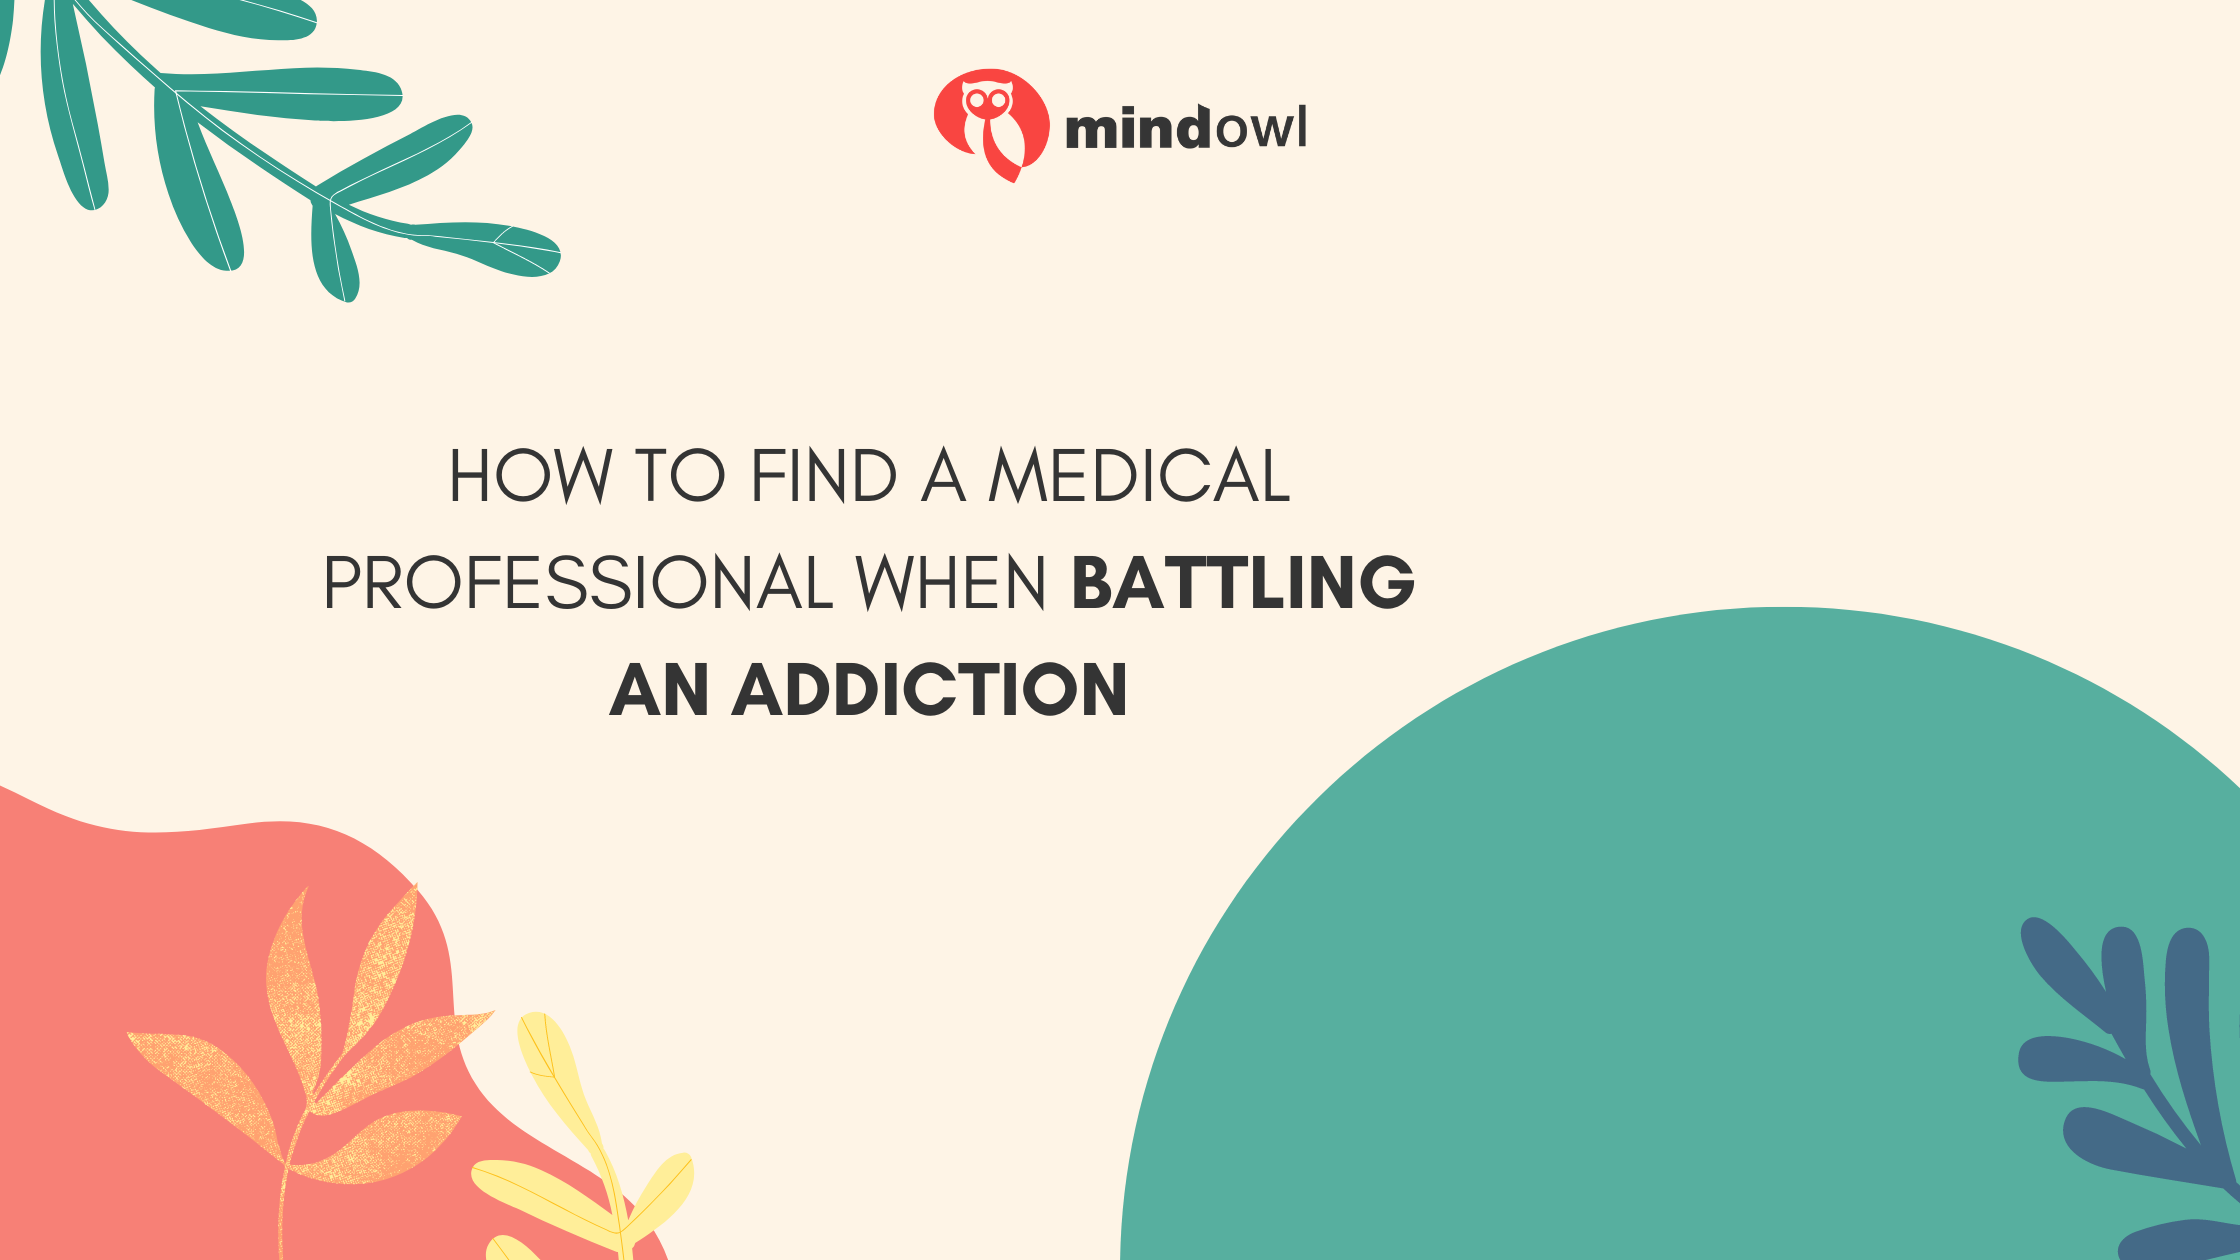 How to Find a Medical Professional When Battling an Addiction